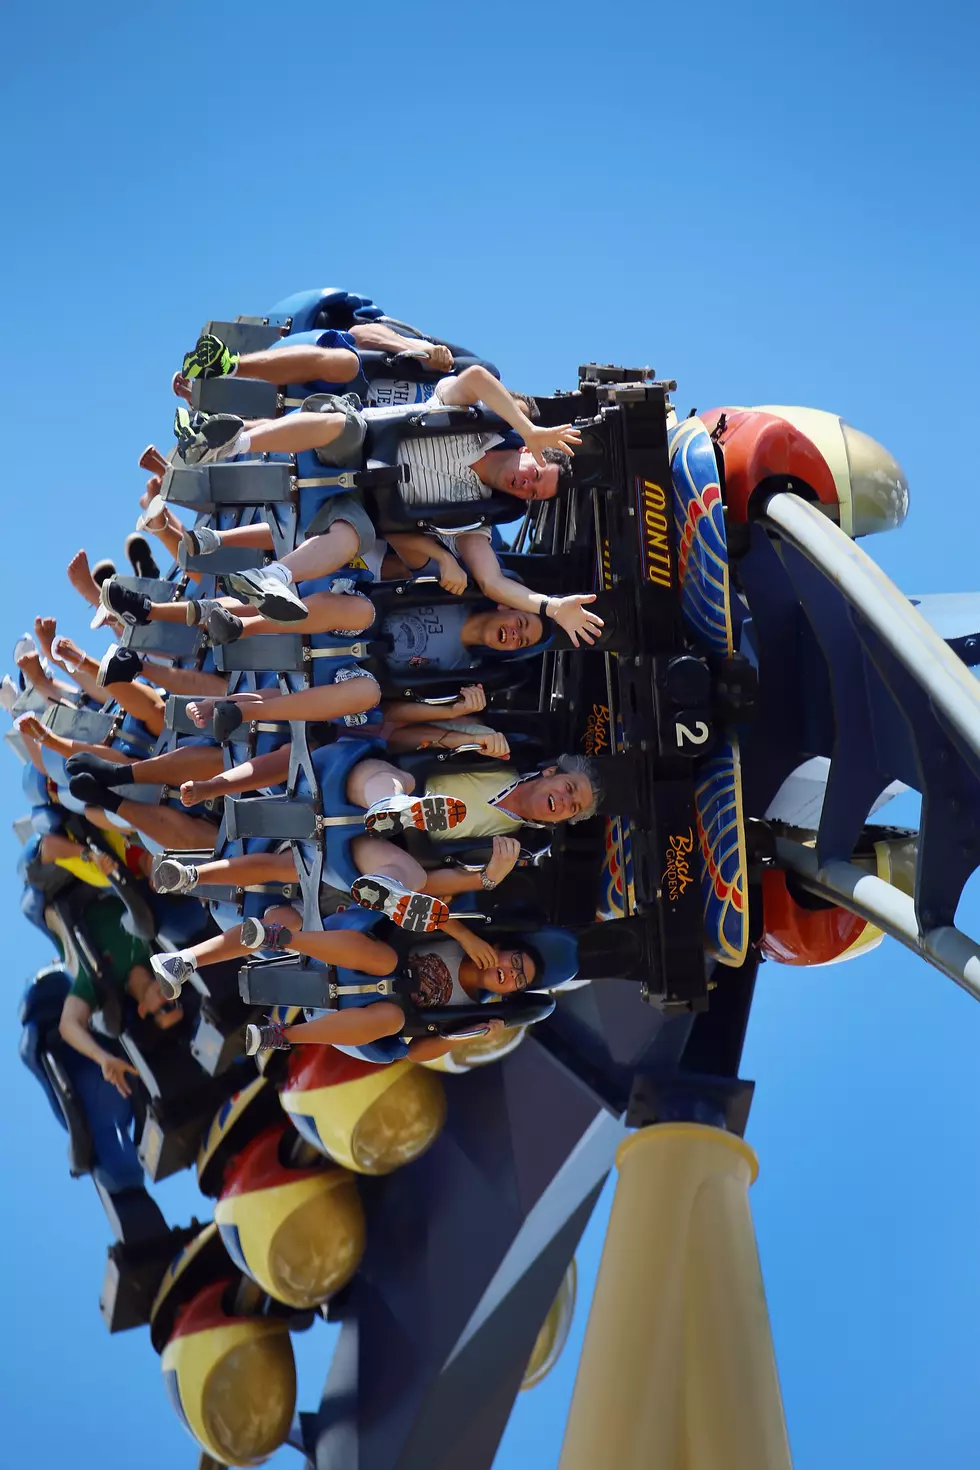 Roller Coaster Thrill Of The Week [WATCH]